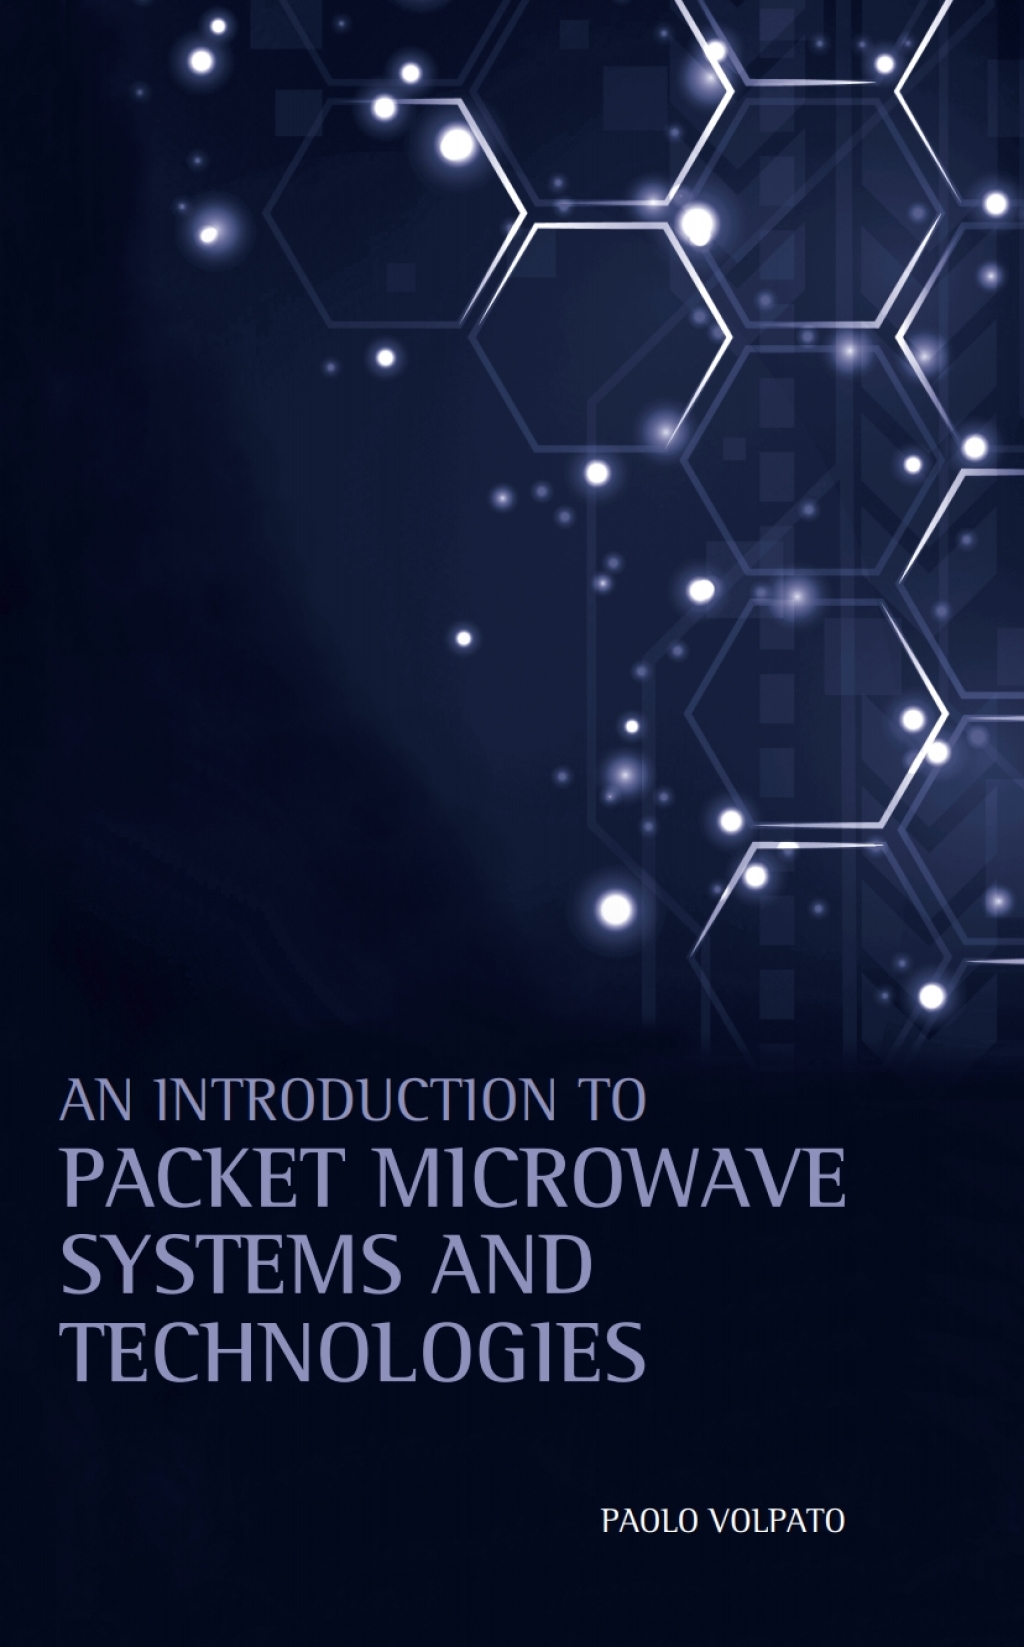 An Introduction to Packet Microwave Systems and Technologies (eBook) - Paolo Volpato